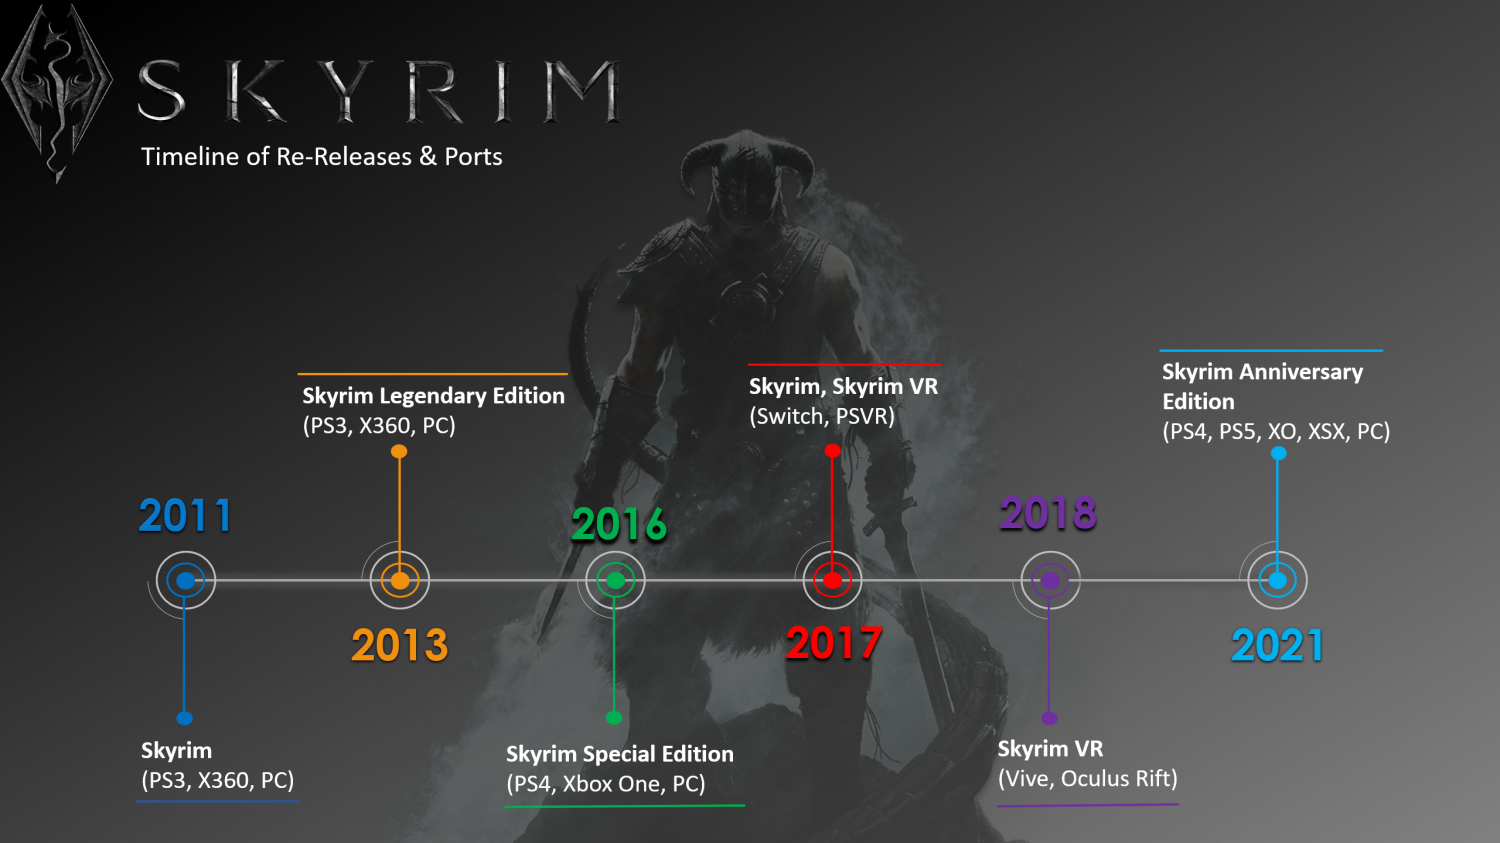 Skyrim is about to get its fourth re-release since launching 10 years ago